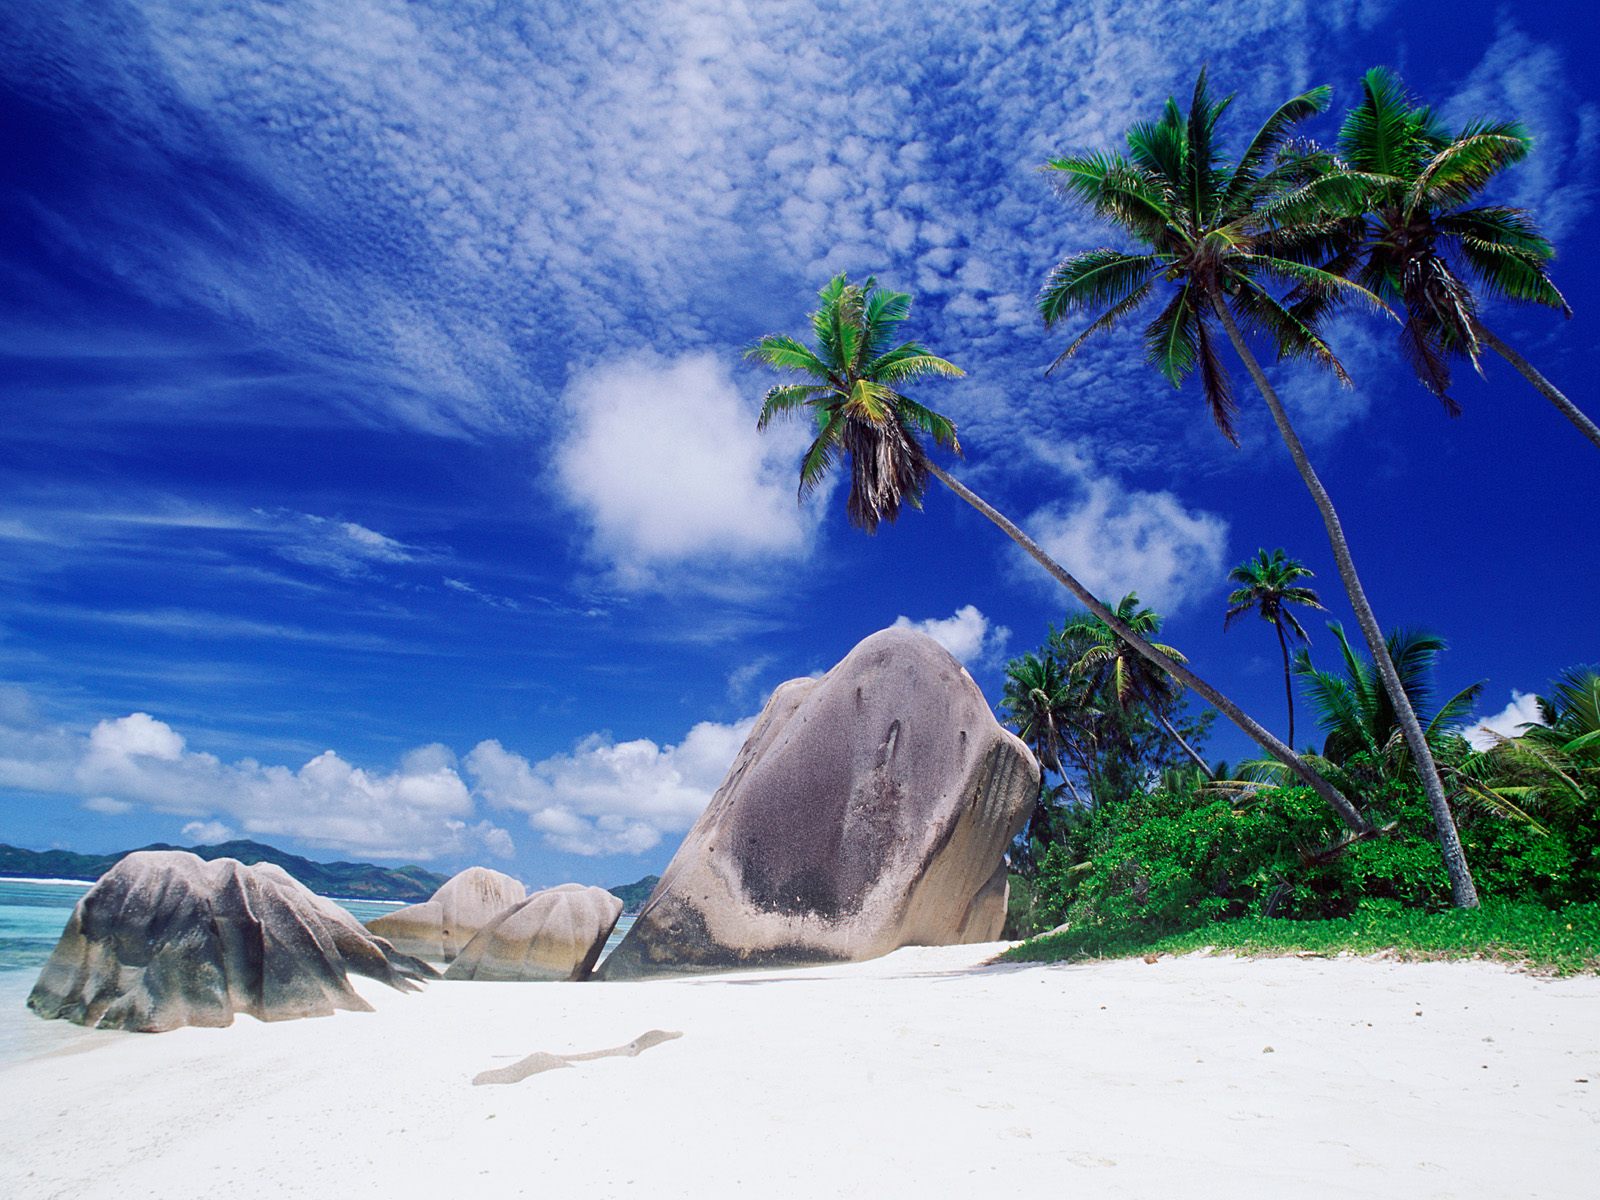 Scenic tropical beach with palm trees, clear blue sky, and ocean waves.